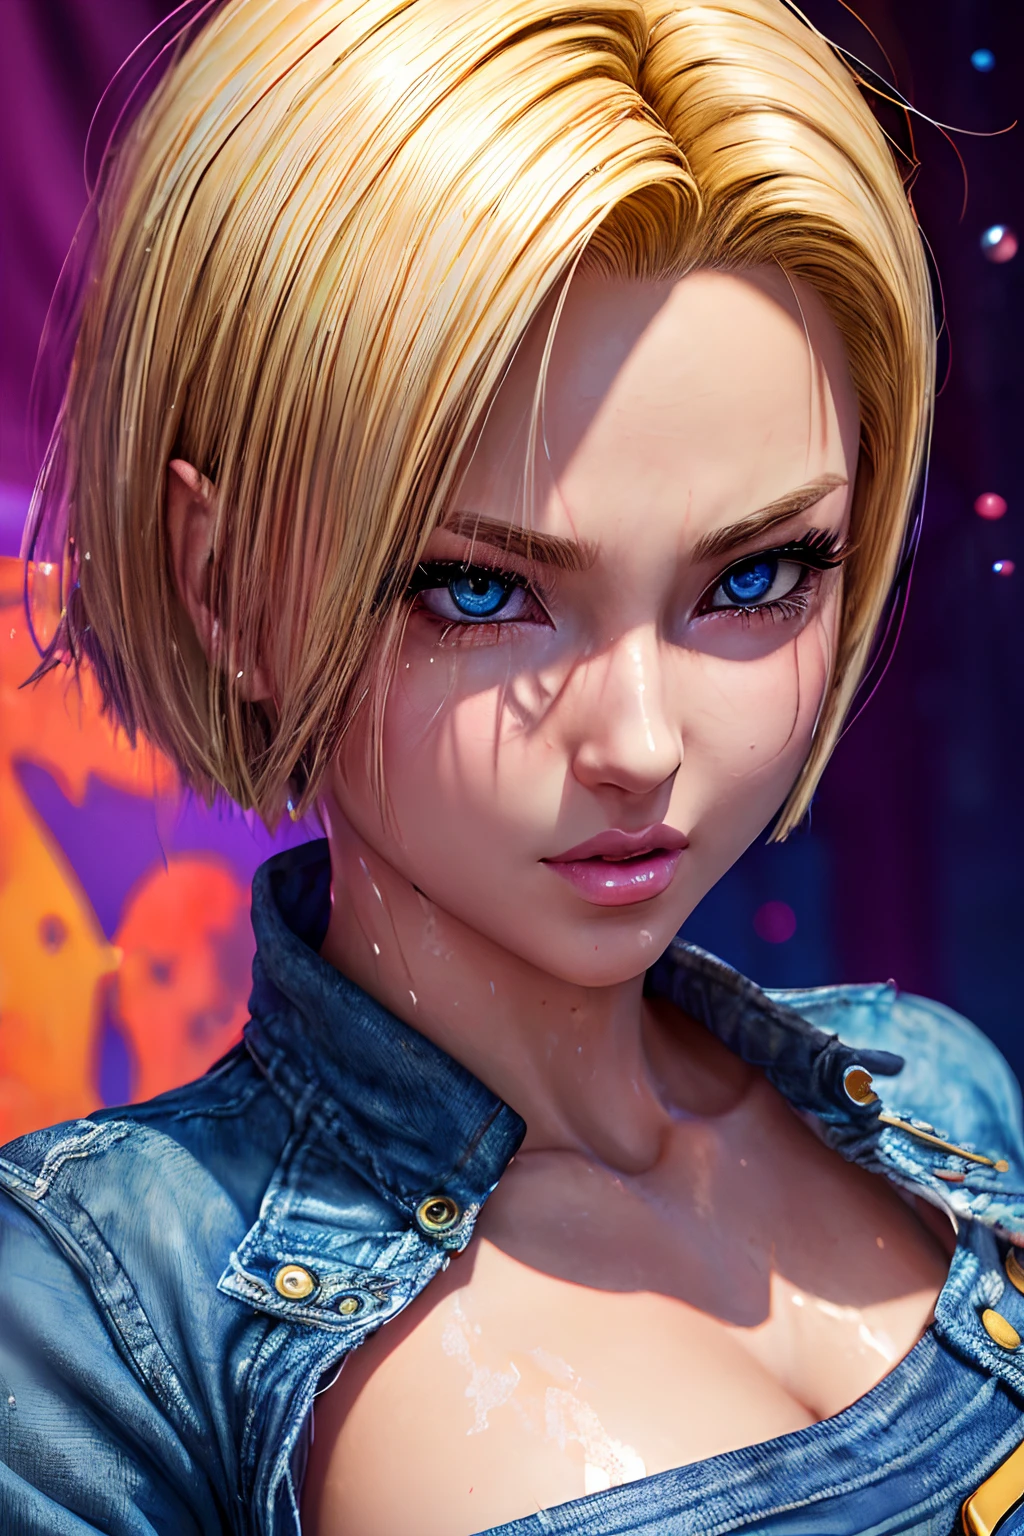 masterpiece, best quality, (extremely detailed CG unity 8k wallpaper, masterpiece, best quality, ultra-detailed, best shadow), (detailed background), (beautiful detailed face, beautiful detailed eyes), High contrast, (best illumination, an extremely delicate and beautiful),1girl,((colourful paint splashes on transparent background, dulux,)), ((caustic)), dynamic angle,beautiful detailed glow,full body, paint splash on face.  close up of a woman, anime girl with blonde short hair and blue jeans posing for a picture, realistic anime 3 d style, android 18, seductive anime girl, anime realism style, attractive anime girl,beautiful alluring anime woman, looking like android 18,